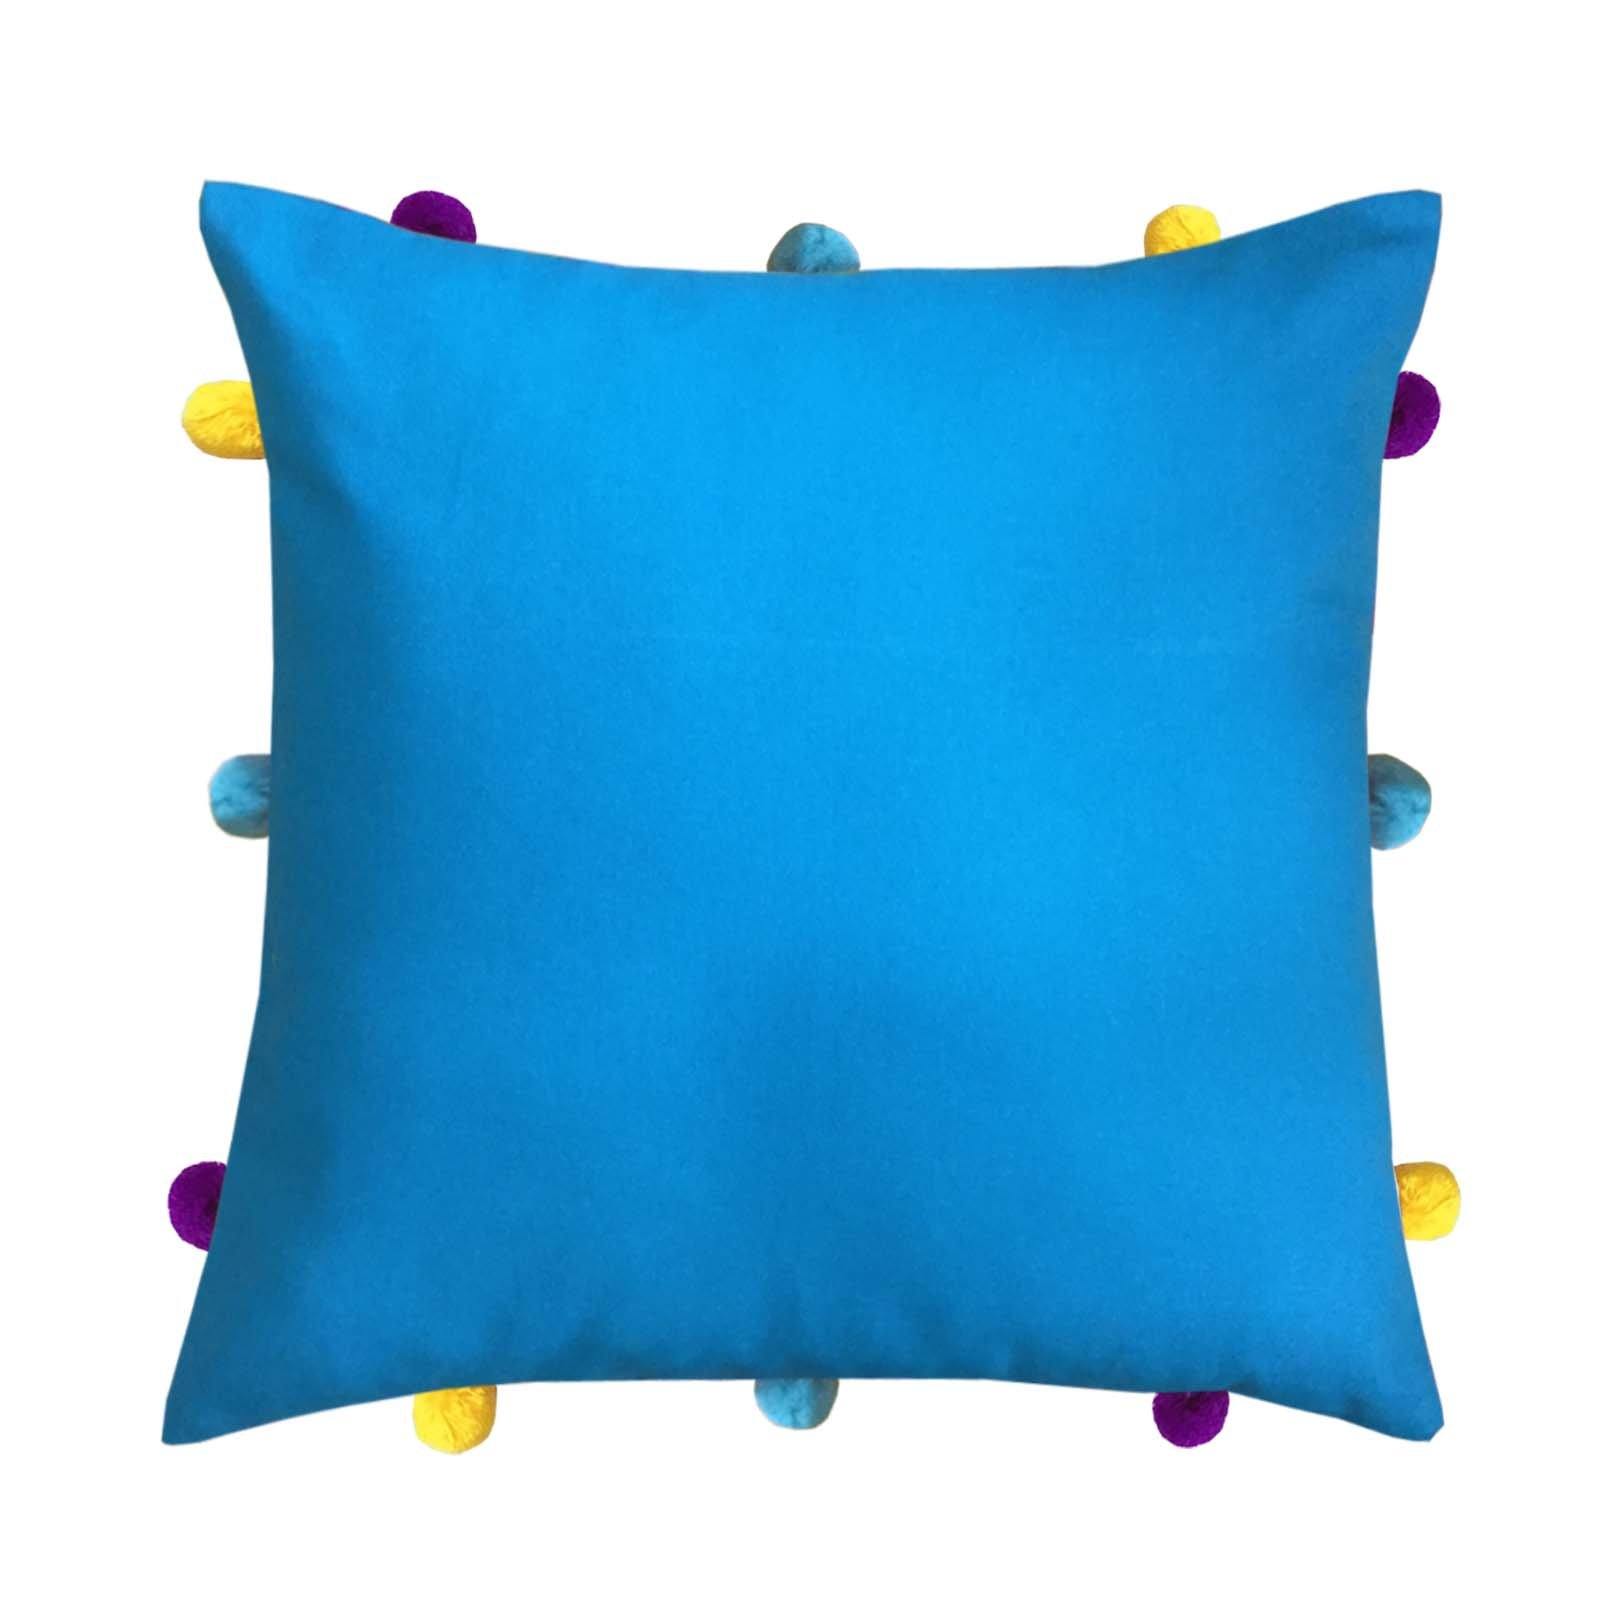 Lushomes Blue Sofa Cushion Cover Online with Colorful Pom Pom (Pack of 1, 12 x 12 inches) - Lushomes